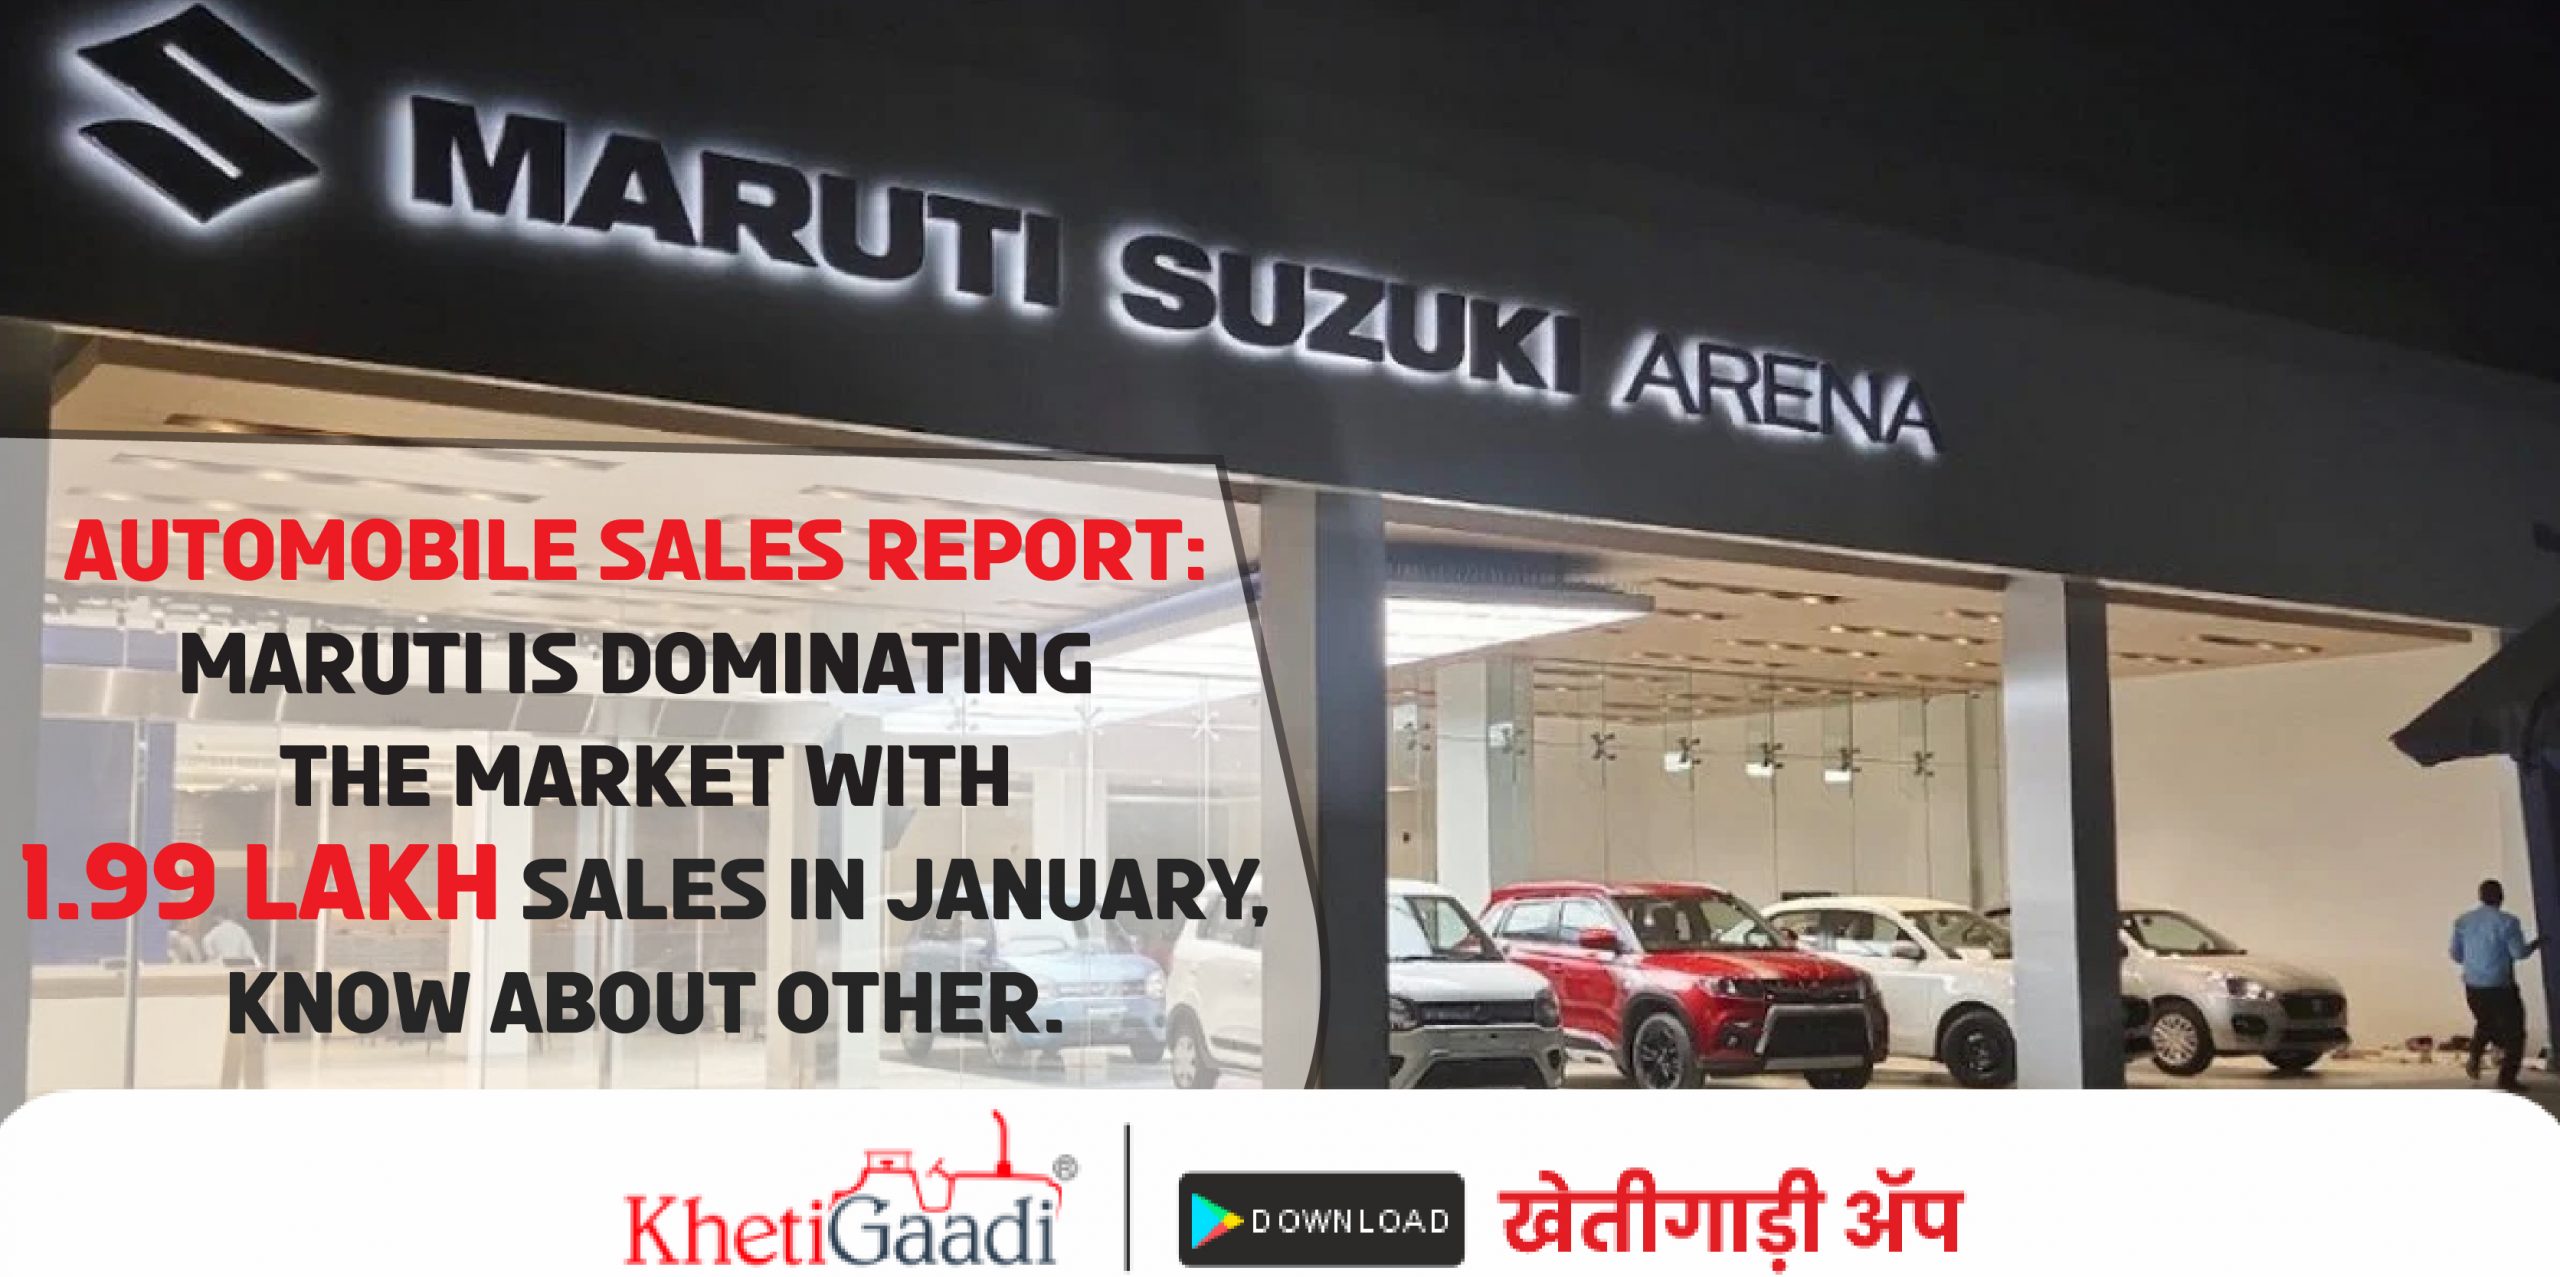 Automobile Sales Report: Maruti is dominating the market with 1.99 lakh sales in January, know about other.